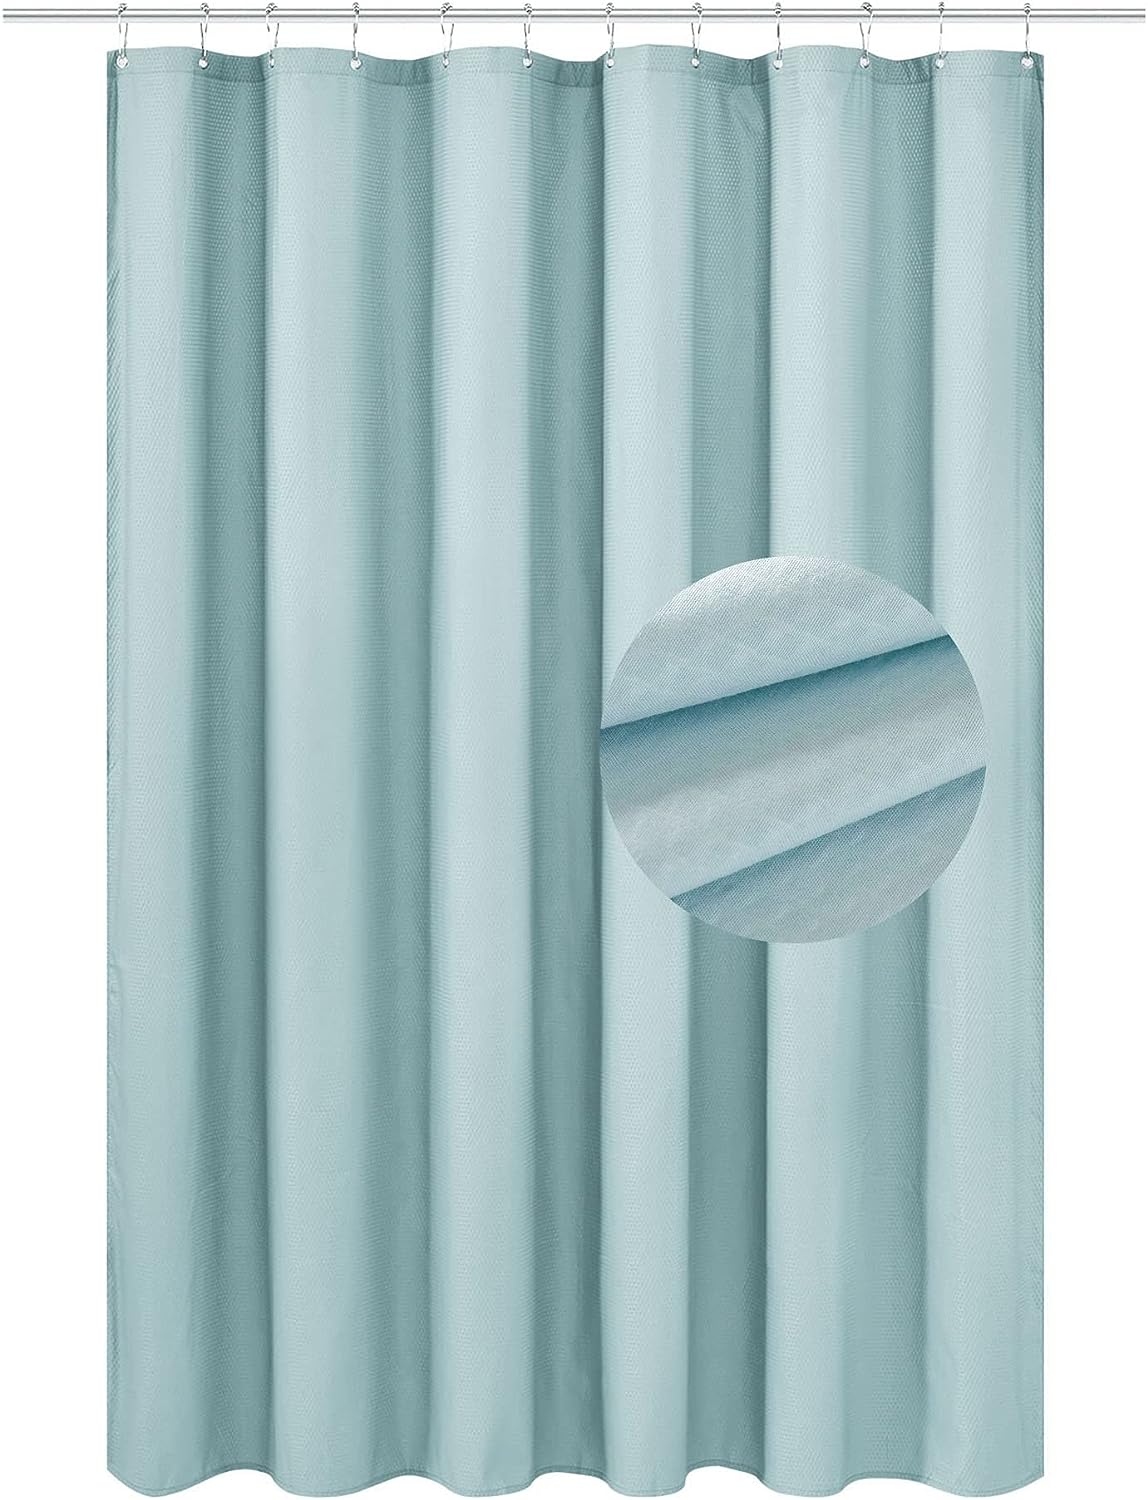 Hookless Shower Curtain PEVA Liner With Snaps 70 W x 54 H New